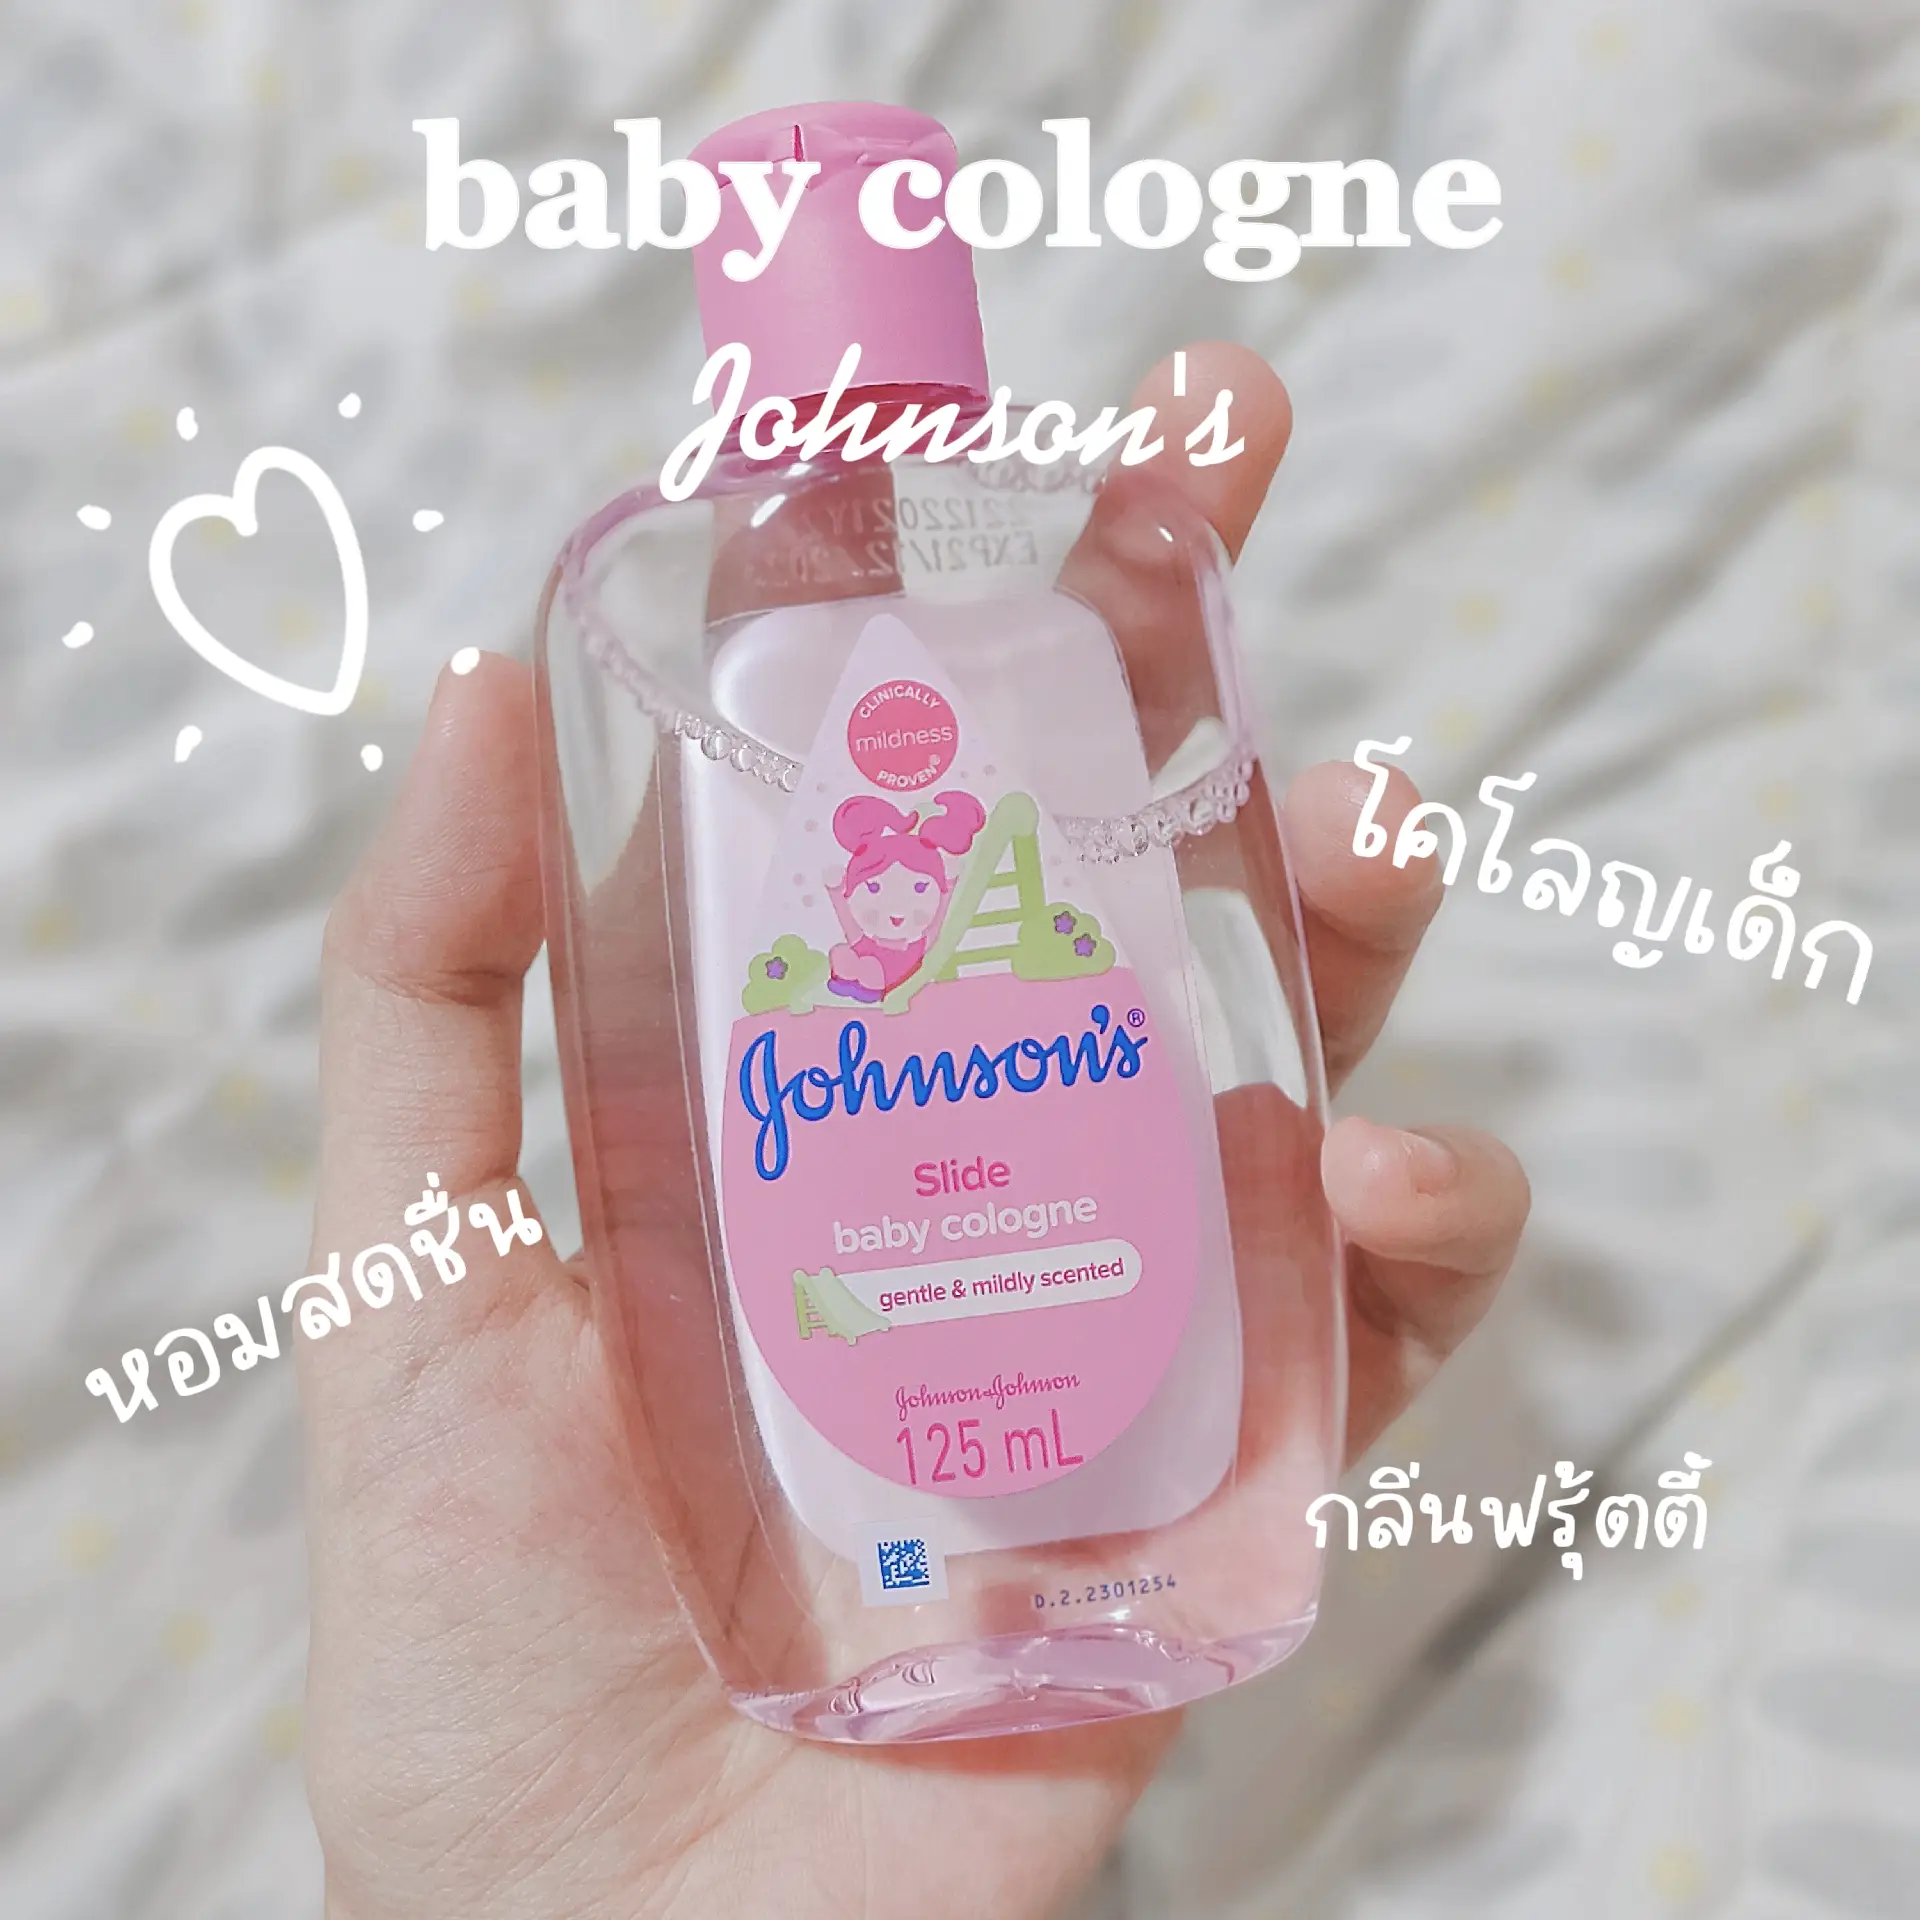 Baby Cologne Relaxing Fragrance: Scented Perfume for Babies